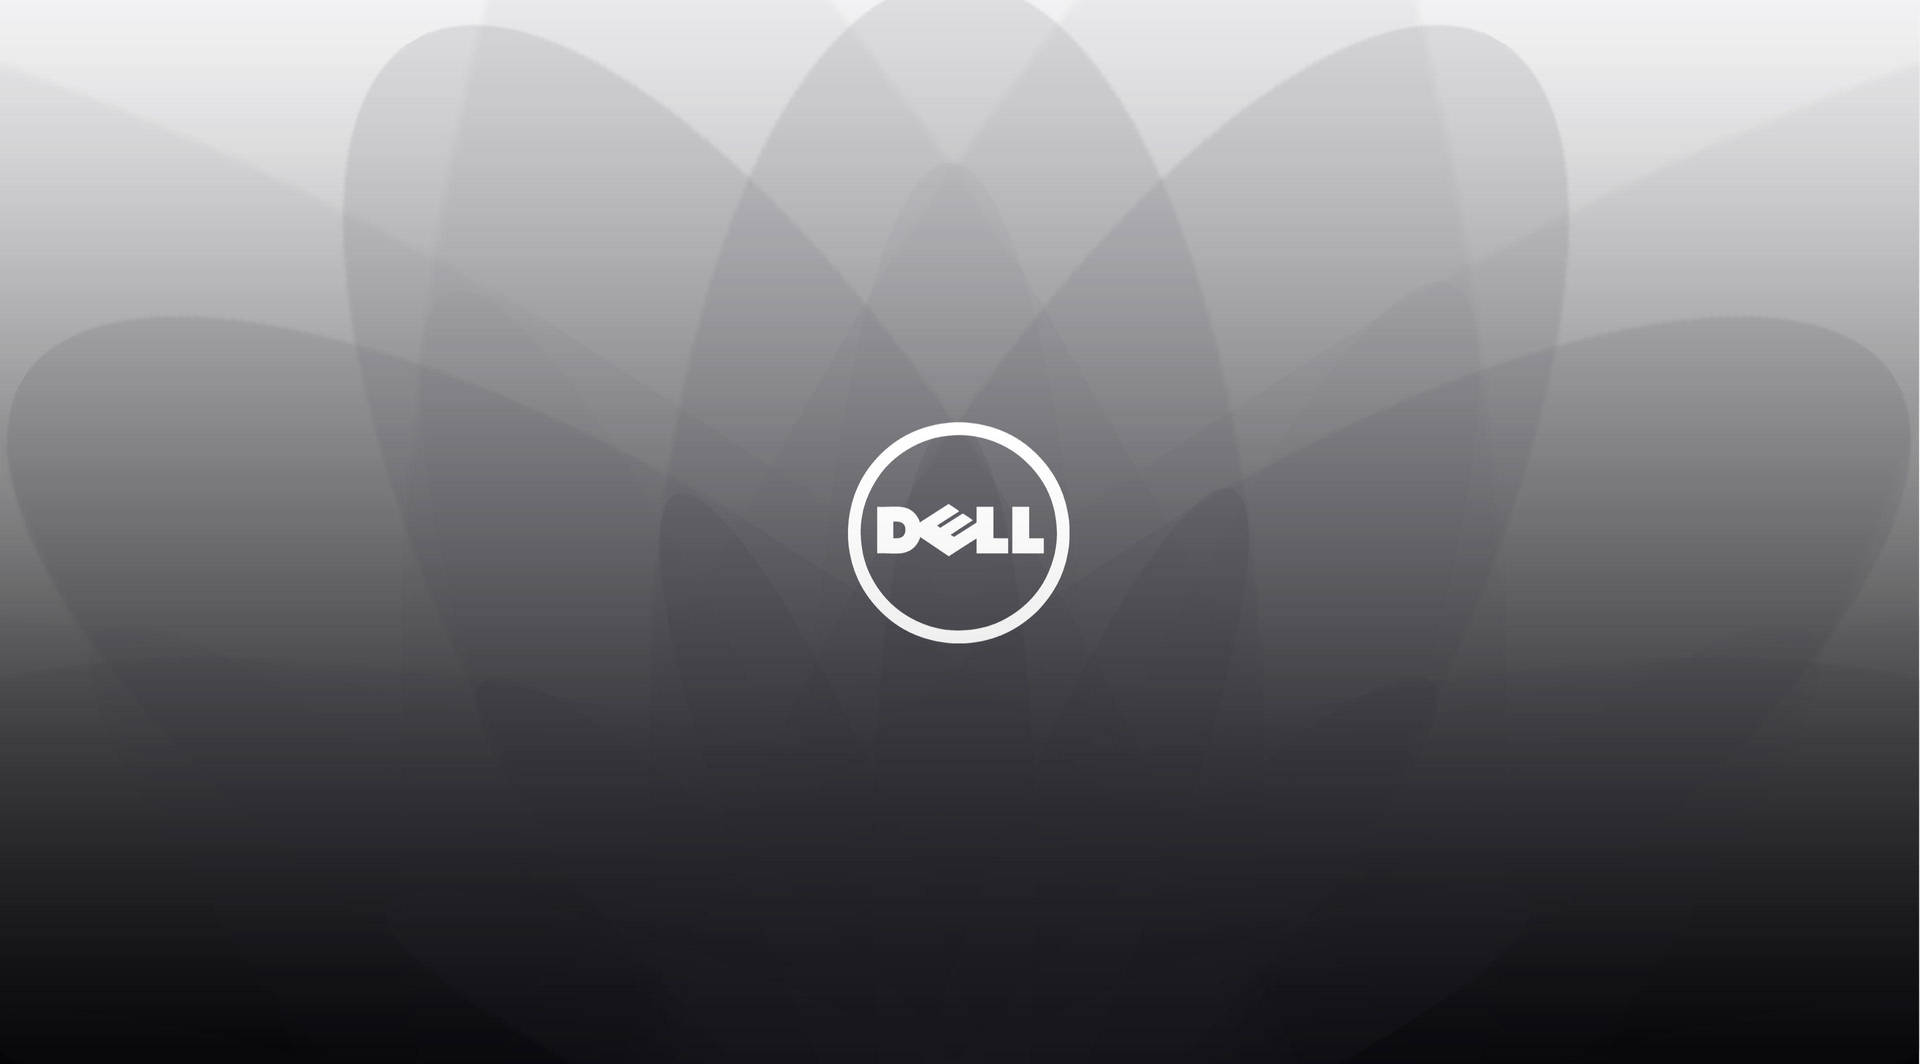 A Dell Hd Logo With Gray And White Design Wallpaper